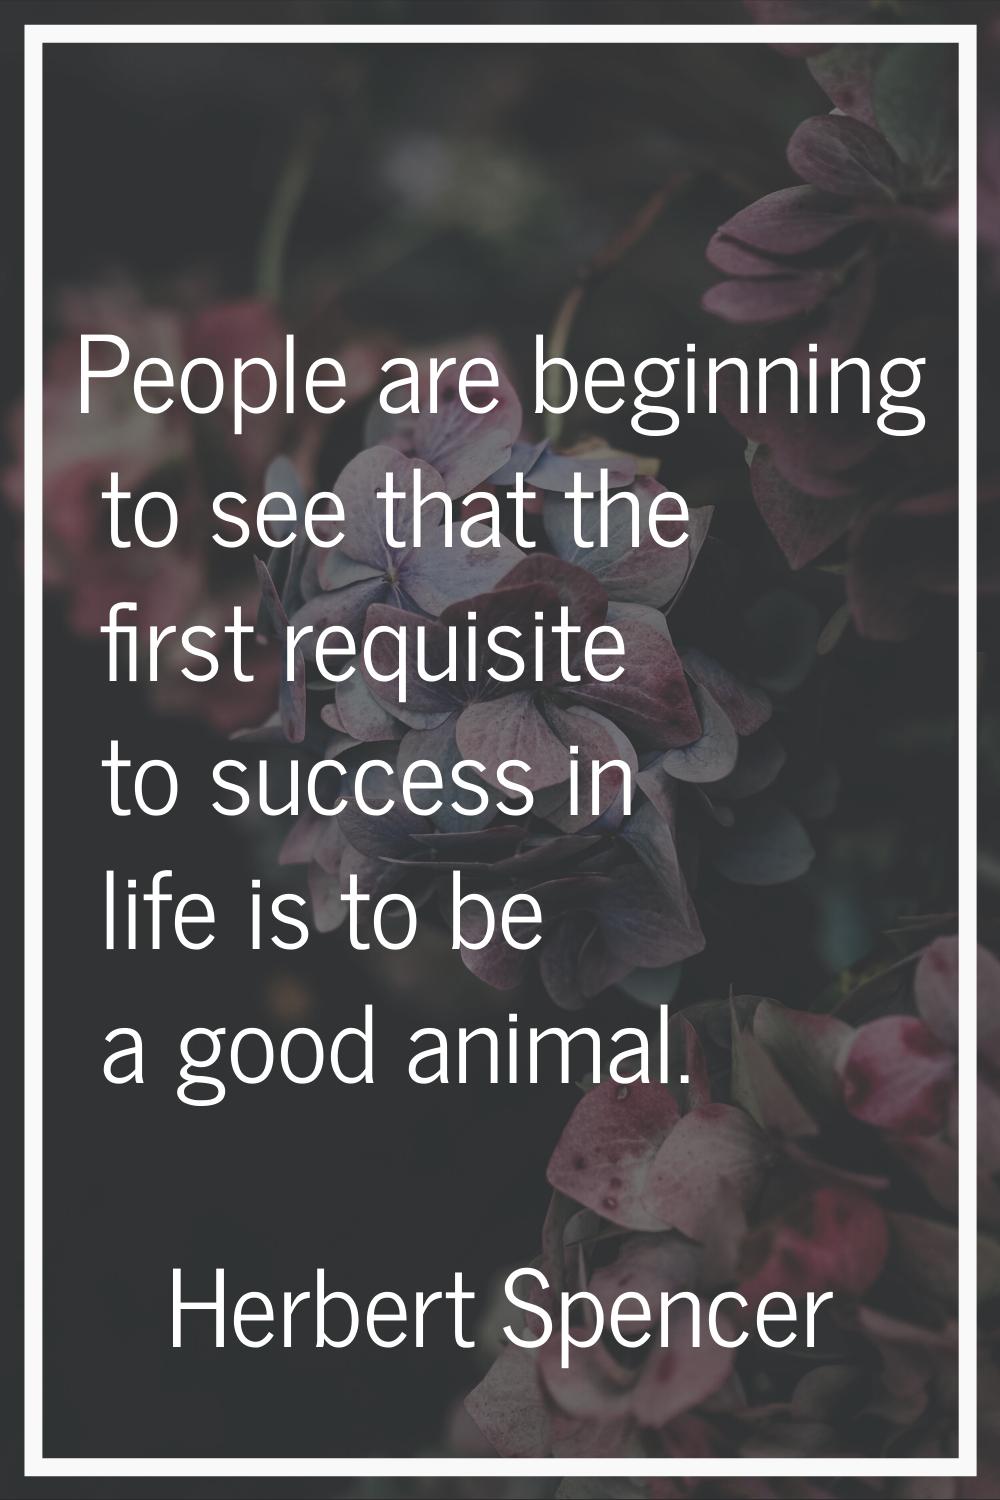 People are beginning to see that the first requisite to success in life is to be a good animal.